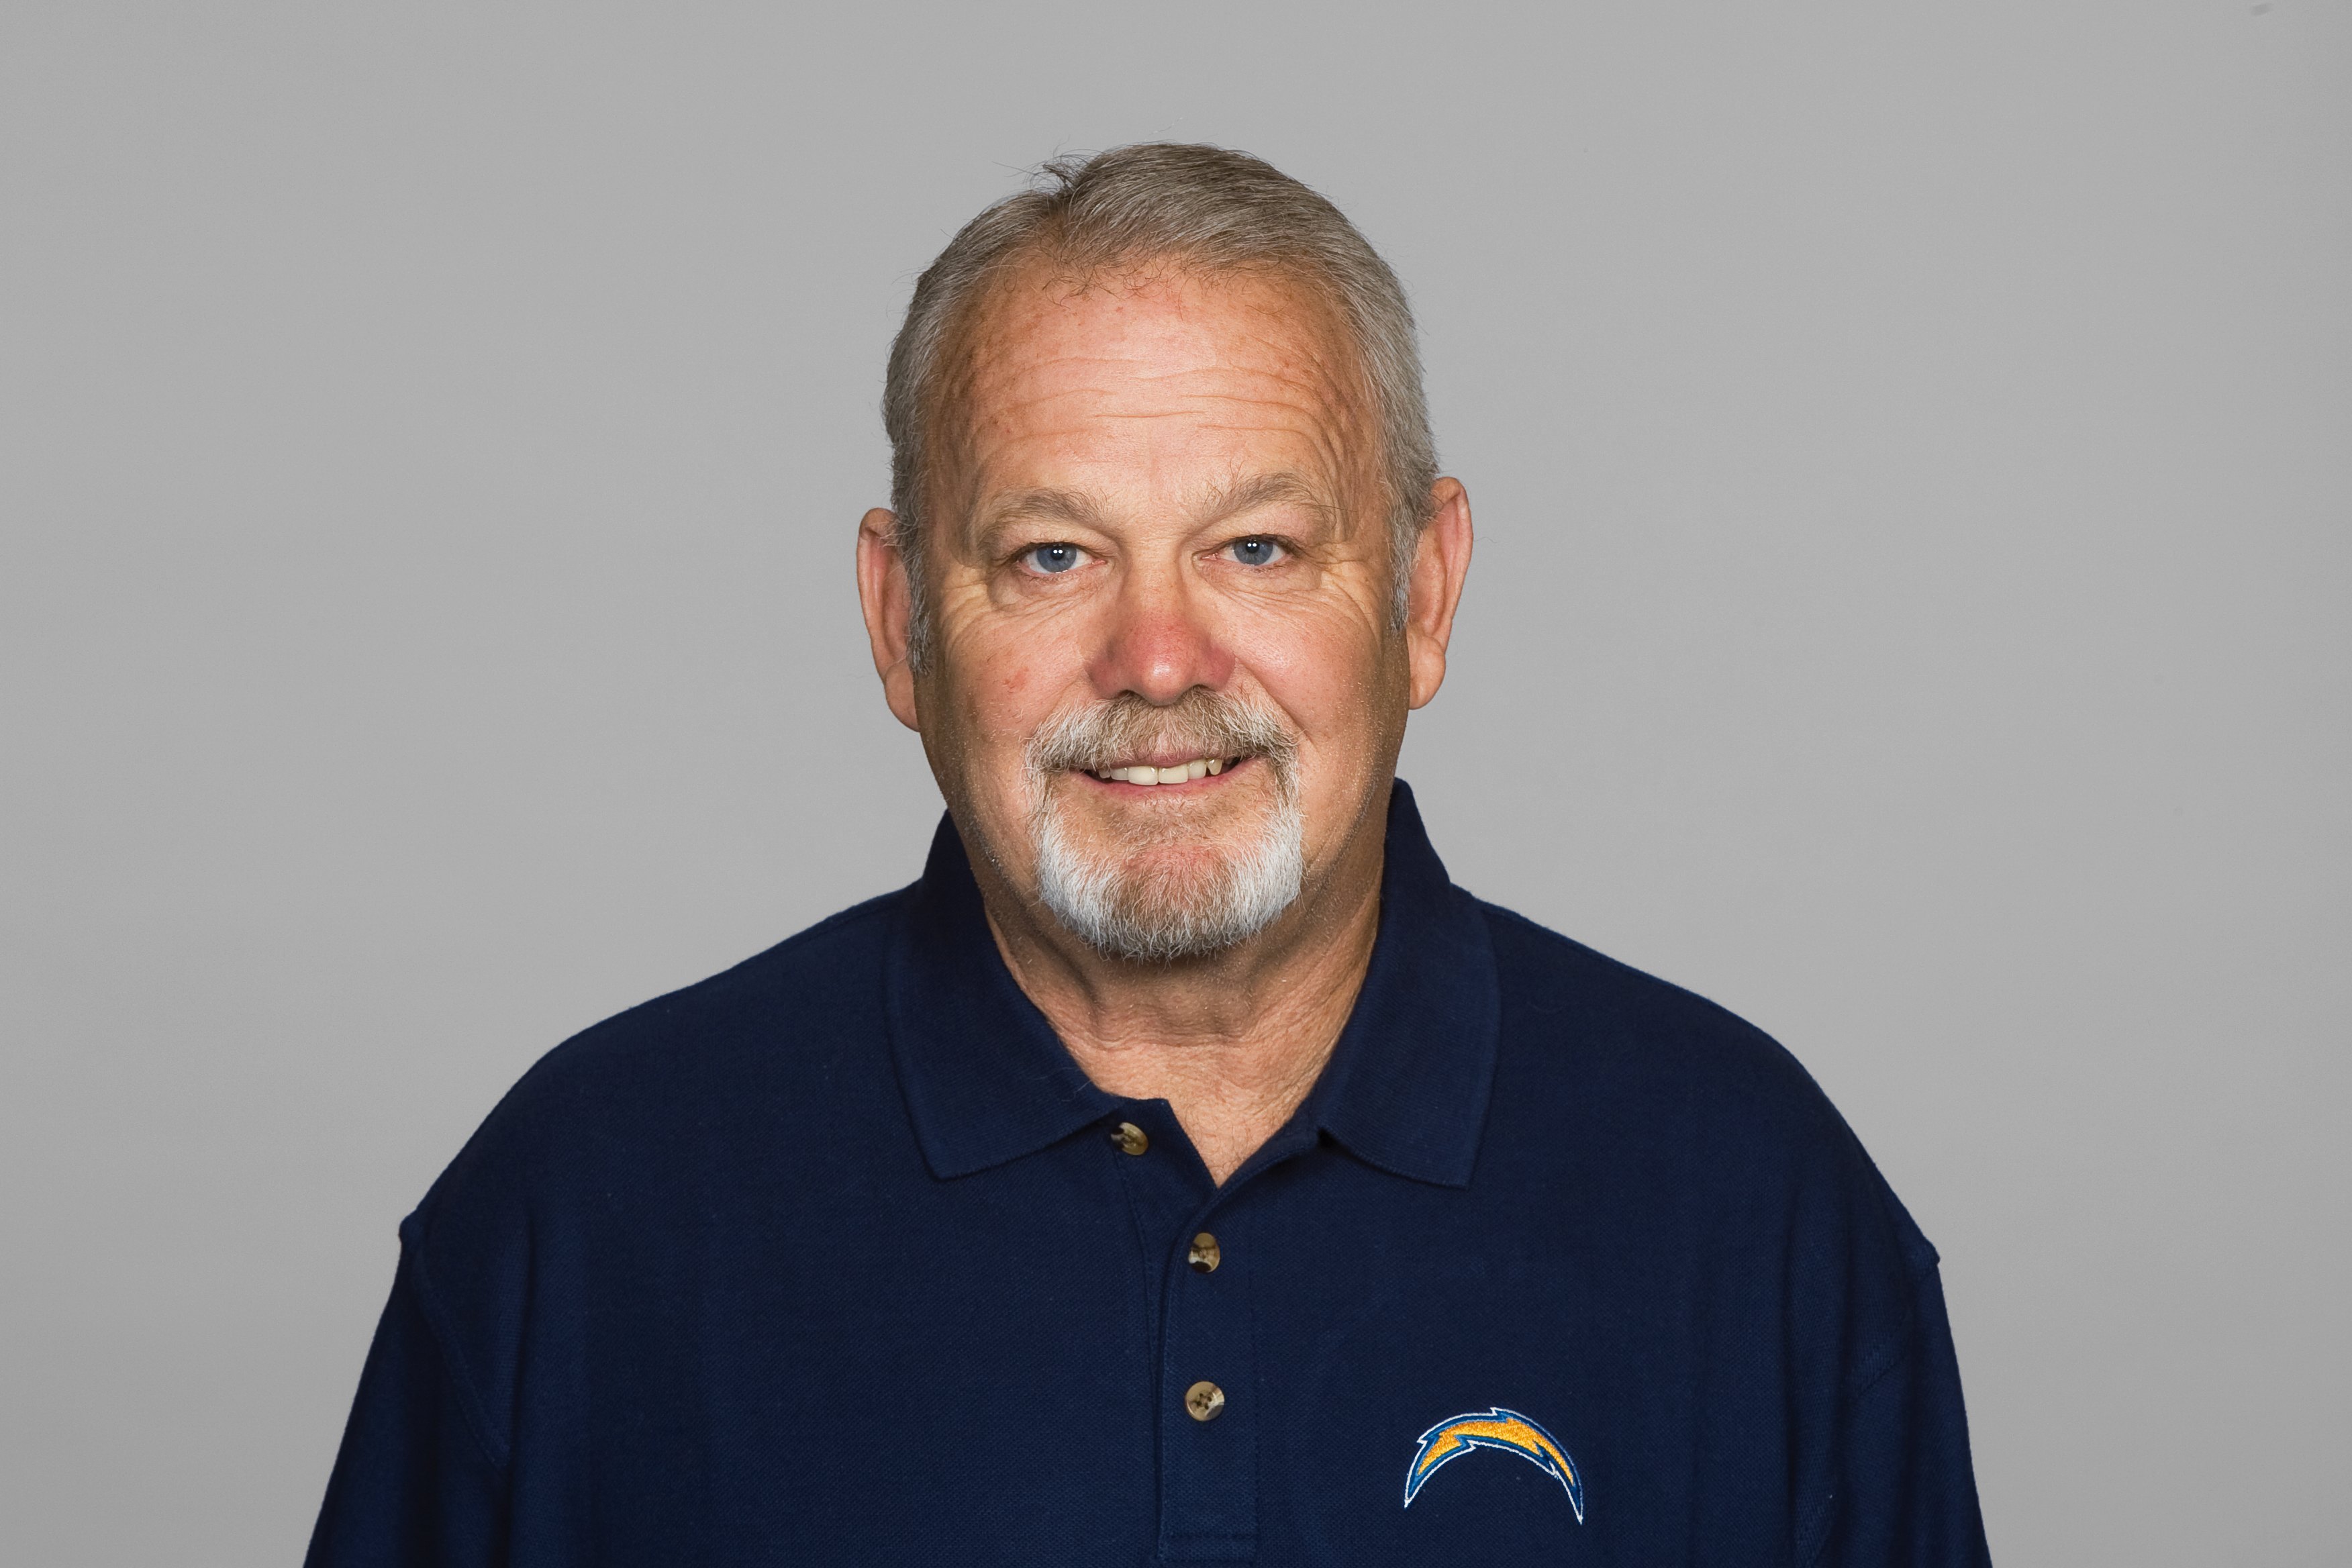 SAN DIEGO - 2008:  Bill Bradley of the San Diego Chargers poses for his 2008 NFL headshot at photo day in San Diego, California.  (Photo by Getty Images)